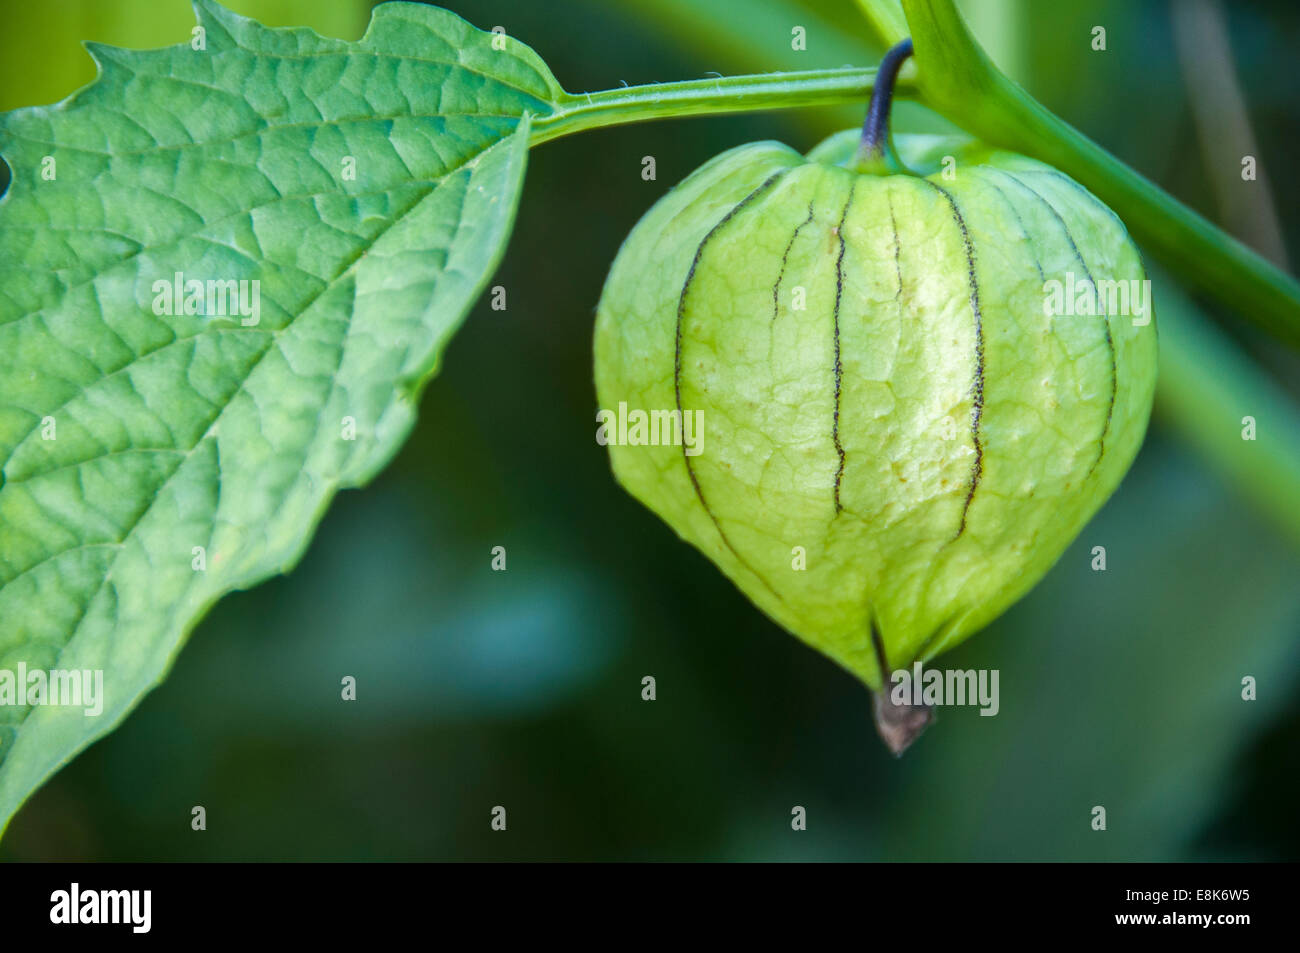 Close up of a Tomatillo or Mexican Husk Tomato with one green leaf. Looks like a organic green lantern. Stock Photo